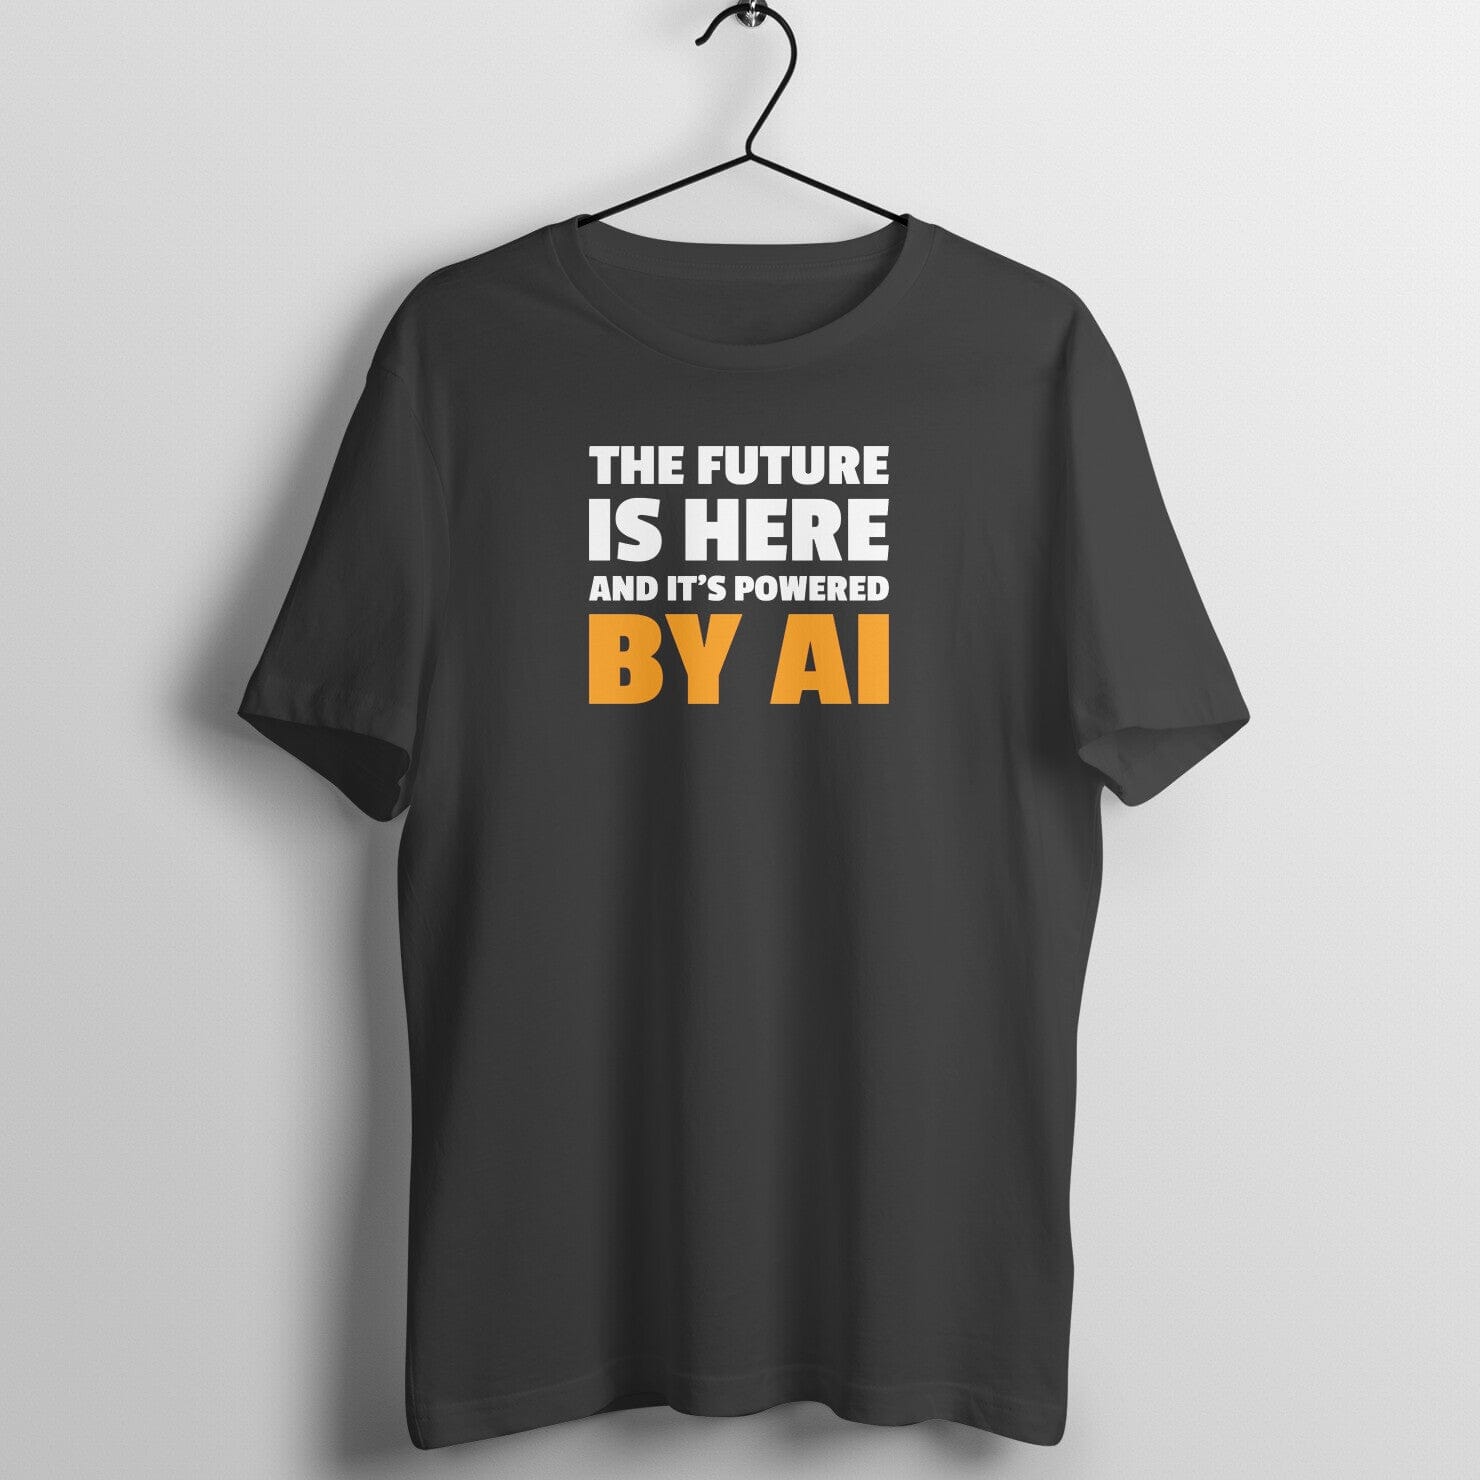 The Future is AI Exclusive Black T Shirt for Men and Women Printrove Black S 